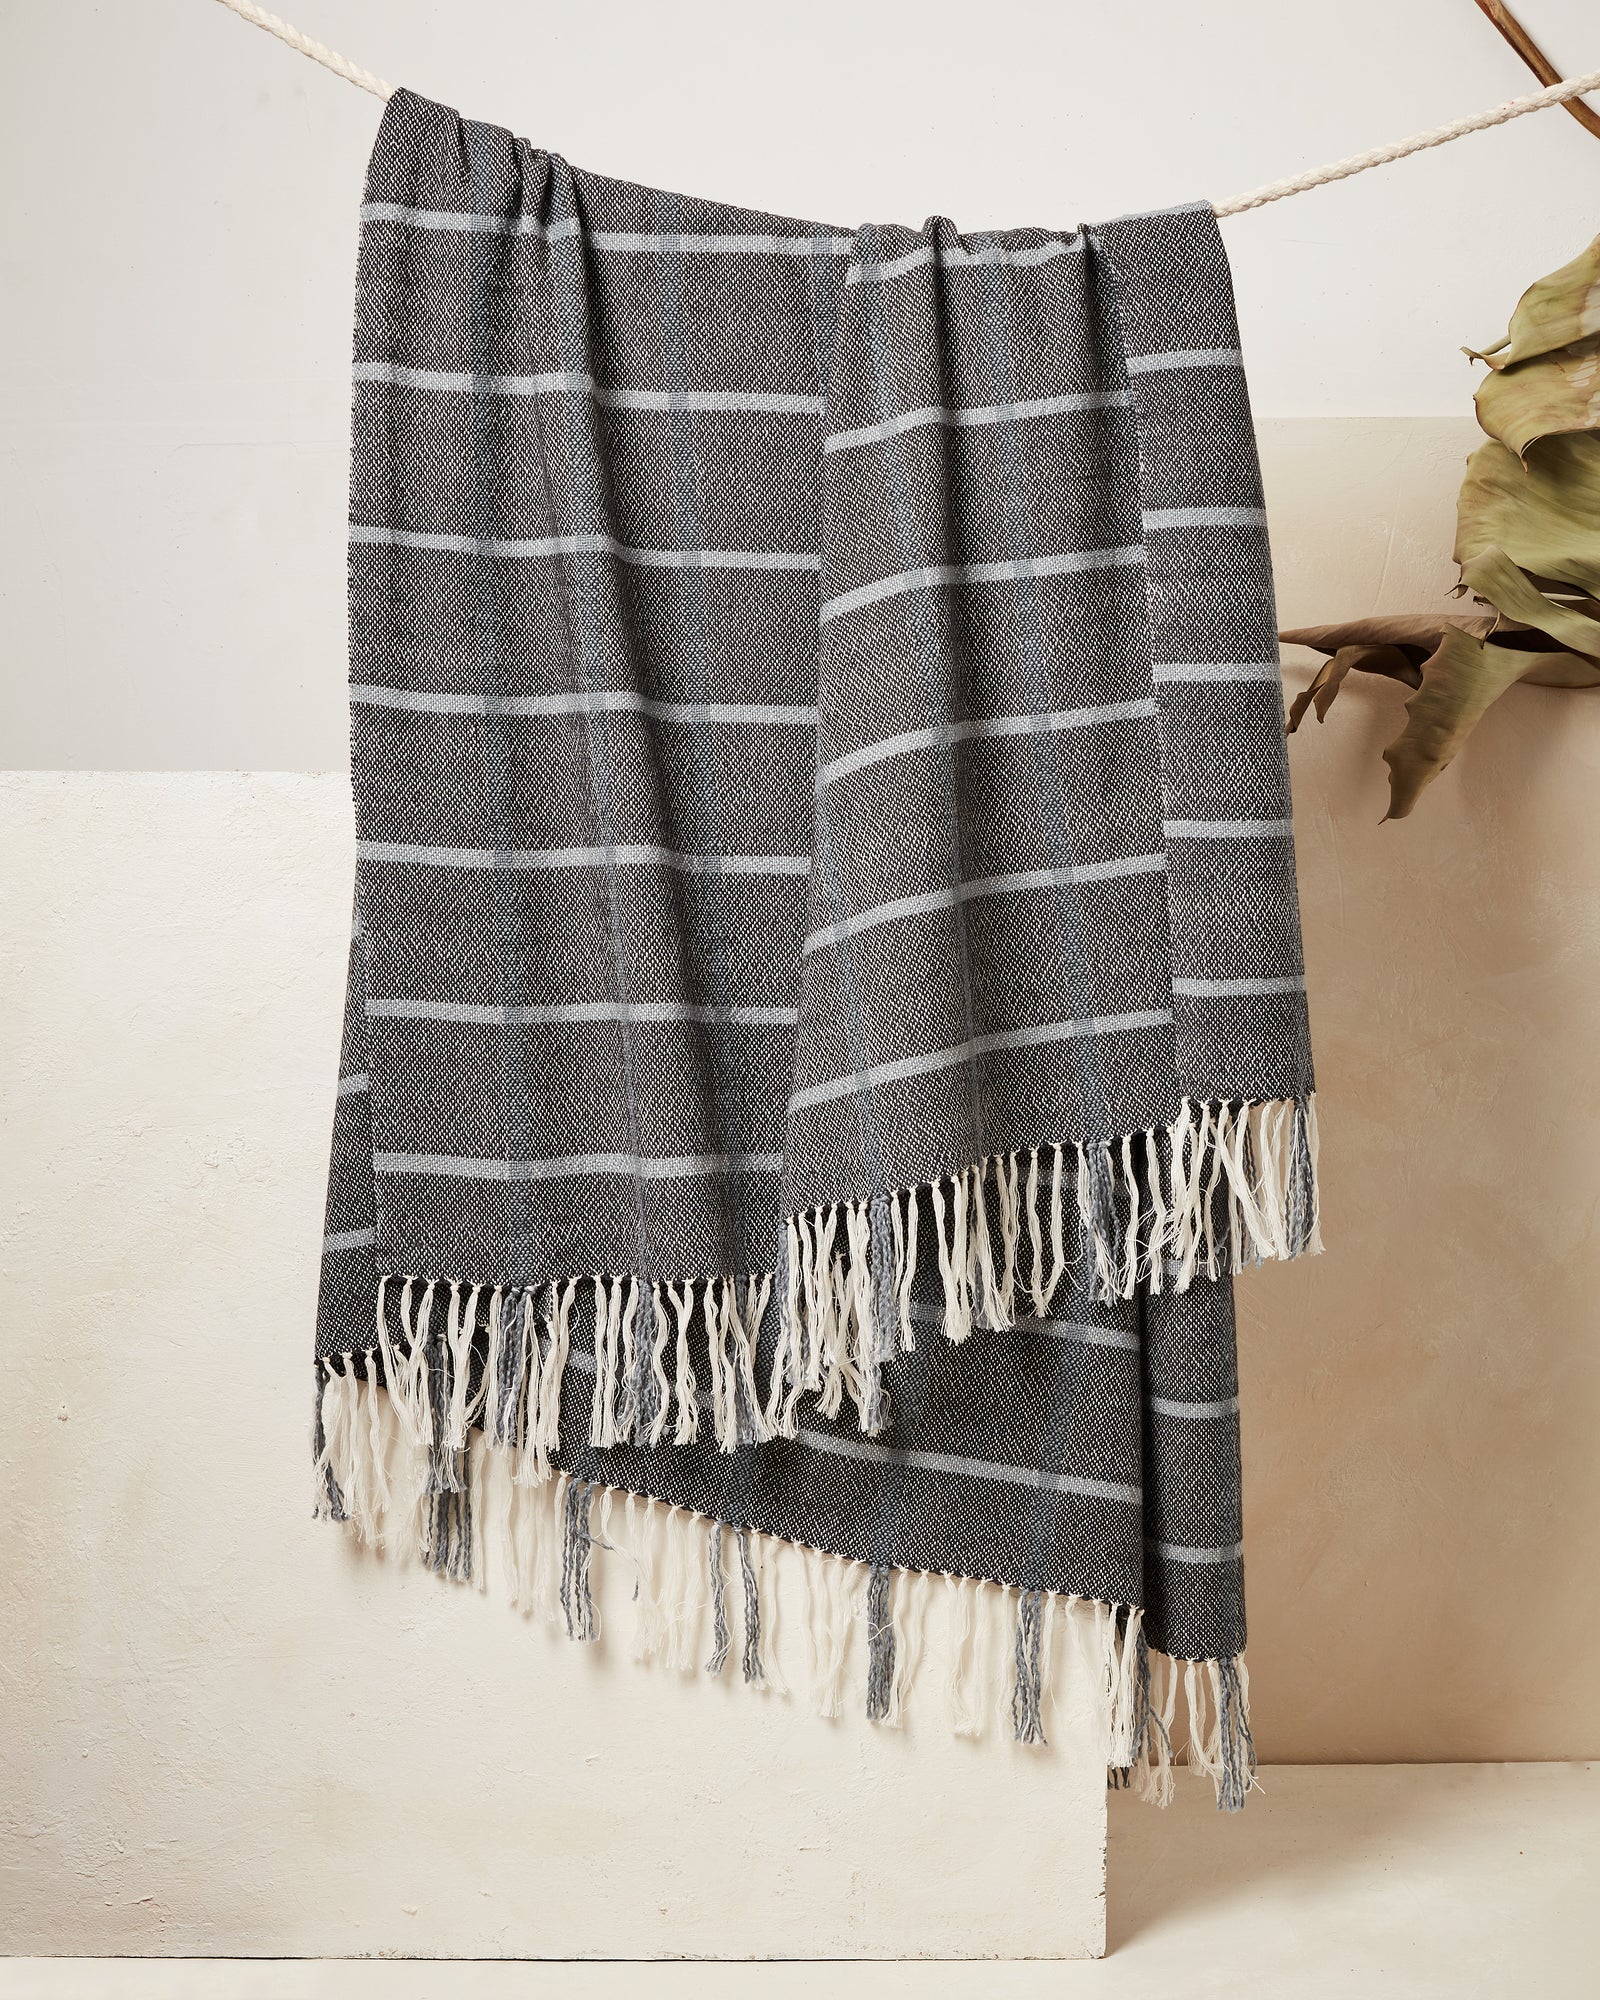 Handwoven Throws and Blankets - Ethical Home Decor | MINNA | MINNA